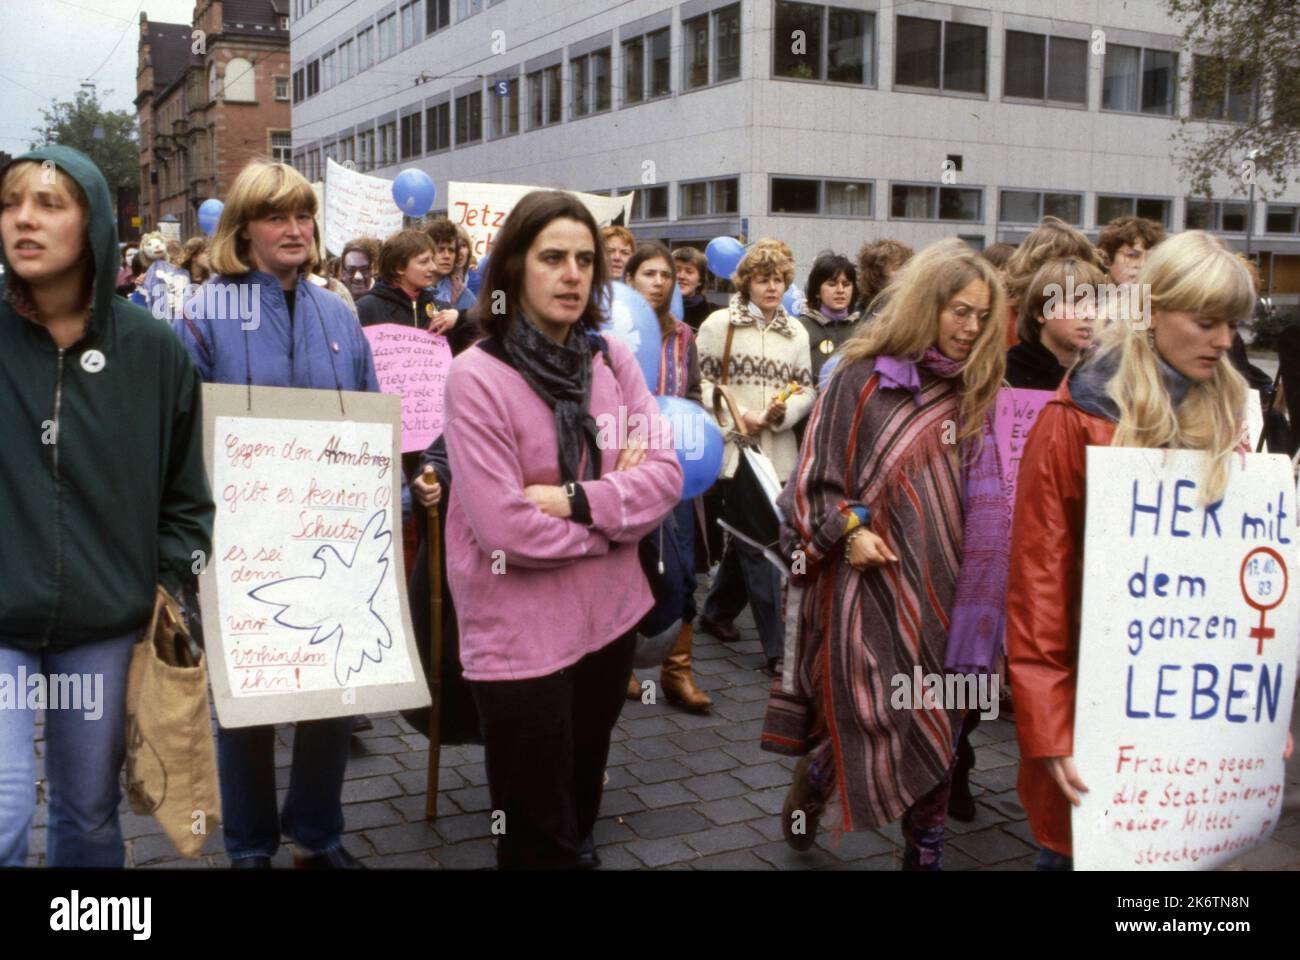 Ruhr area. Women demonstrate for equal rights on Women's Day. ca 1980s Stock Photo